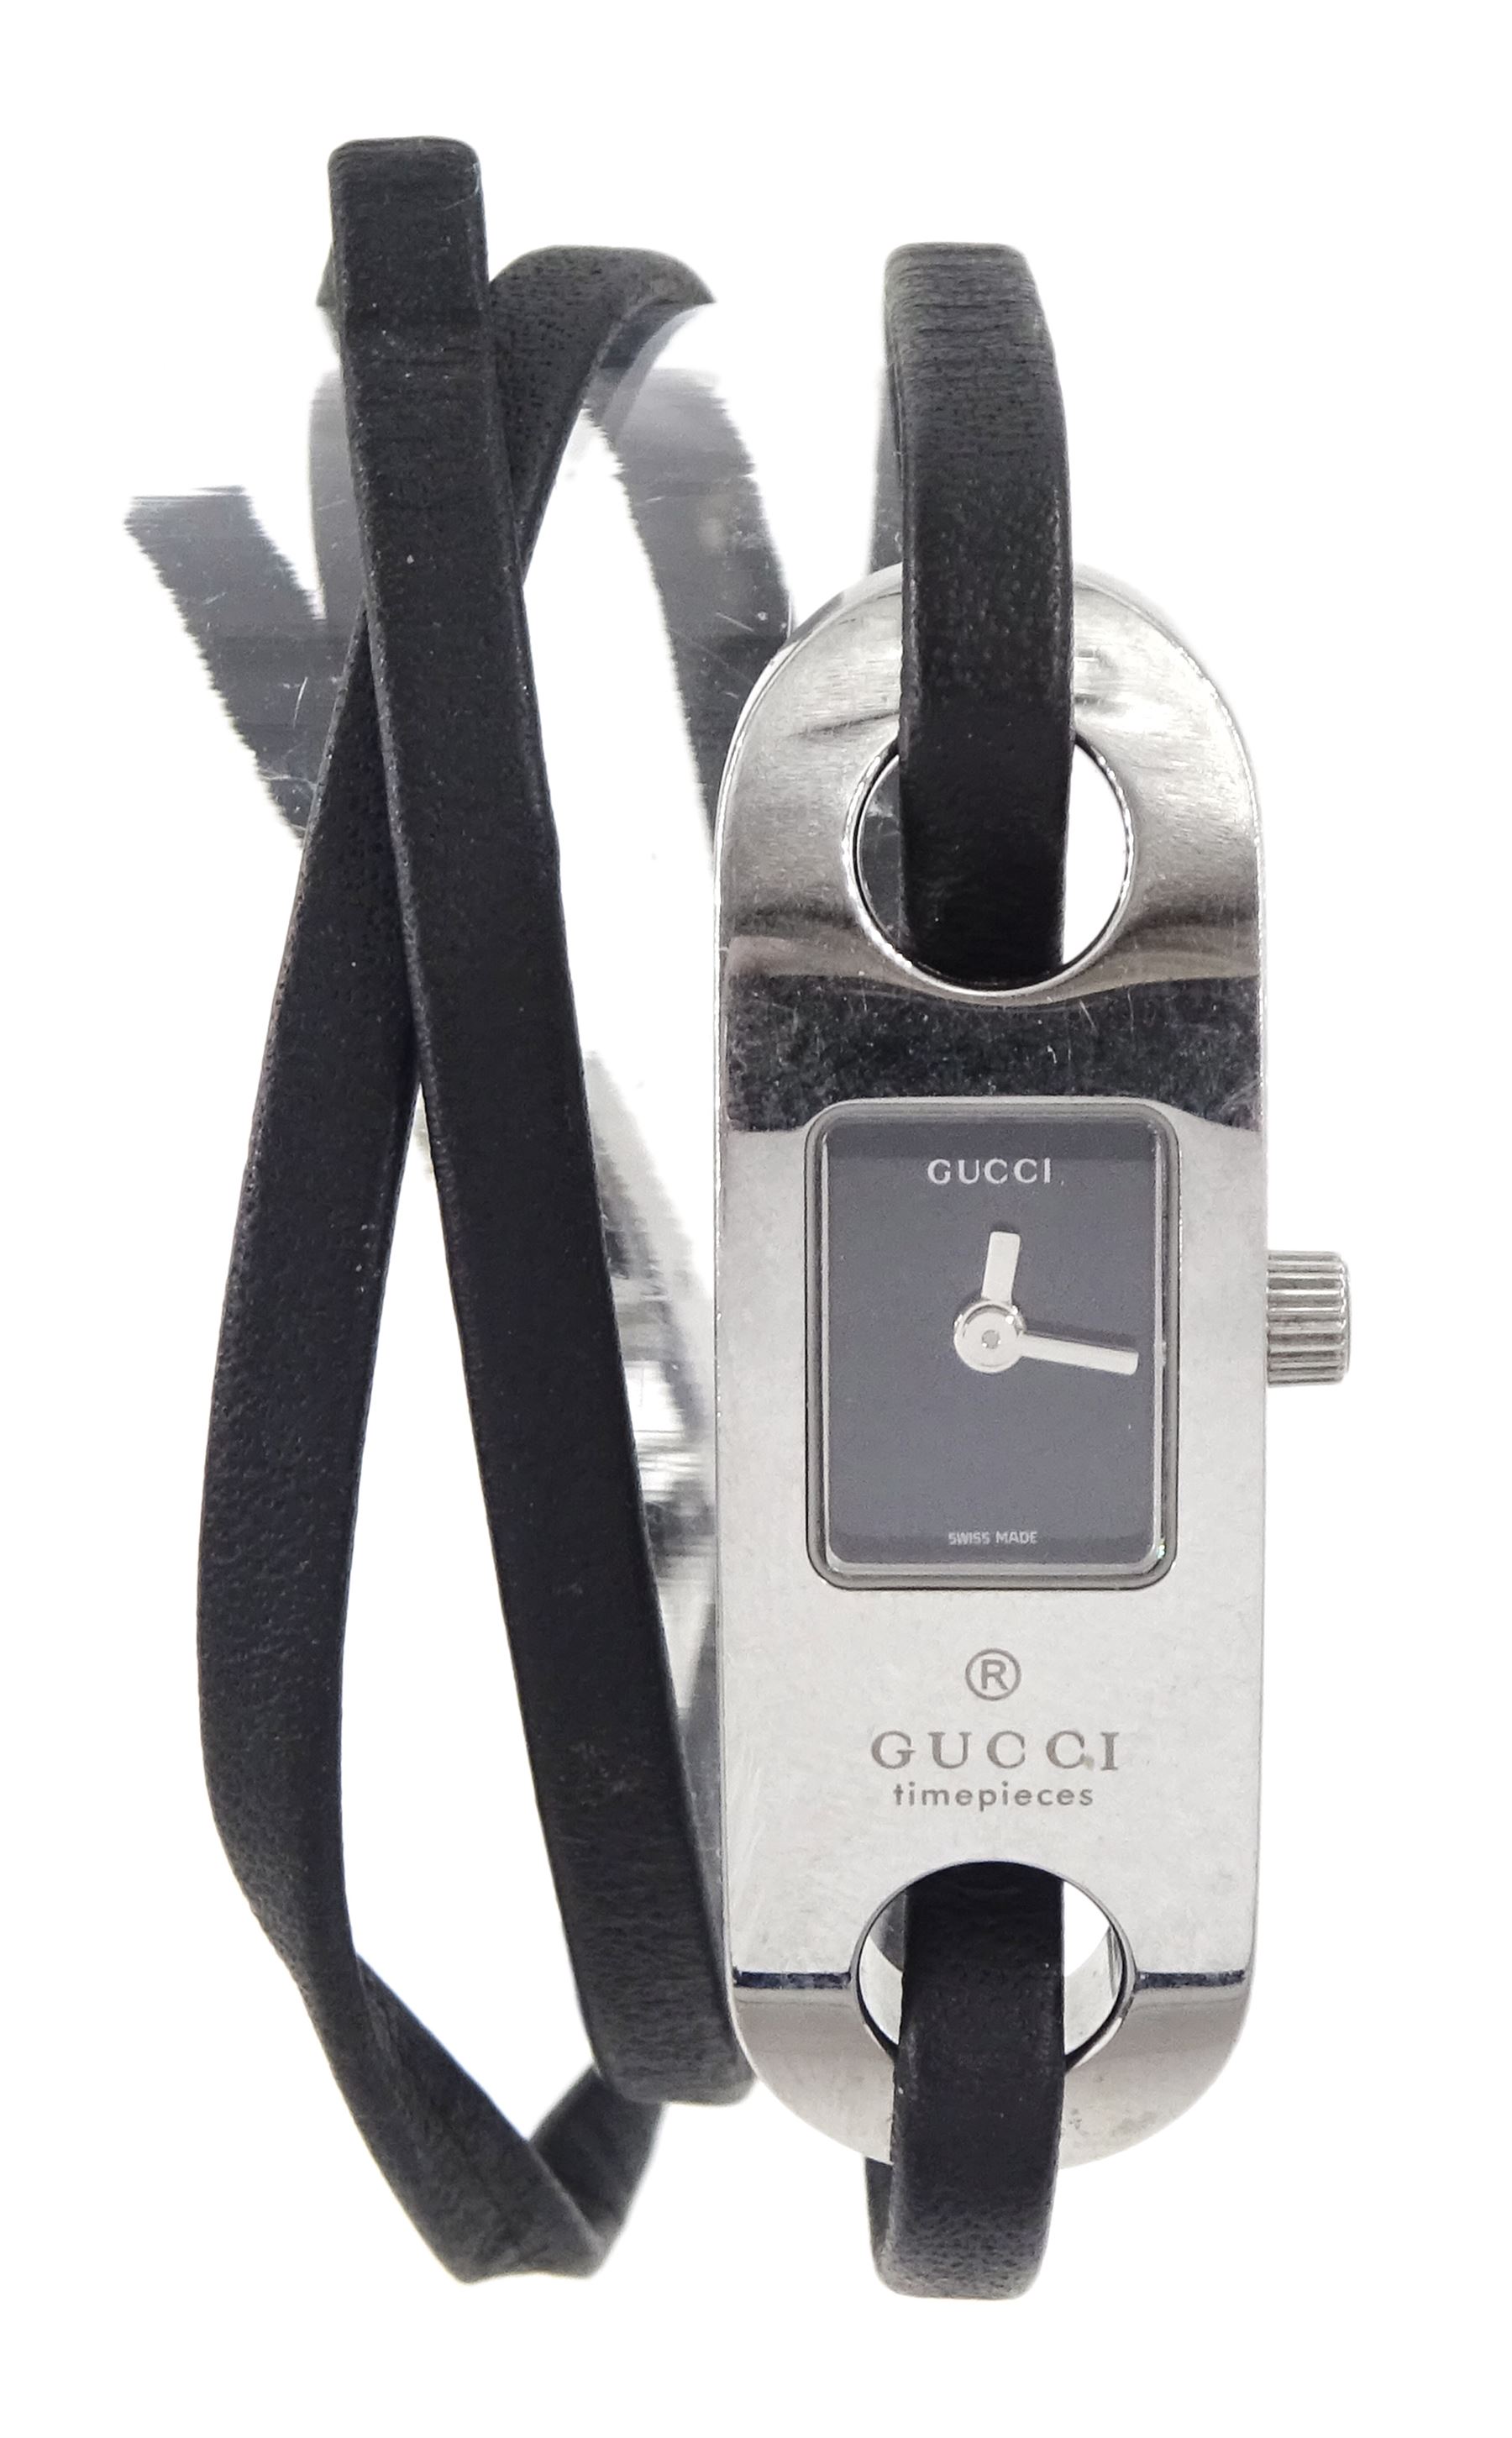 Gucci ladies stainless steel wristwatch